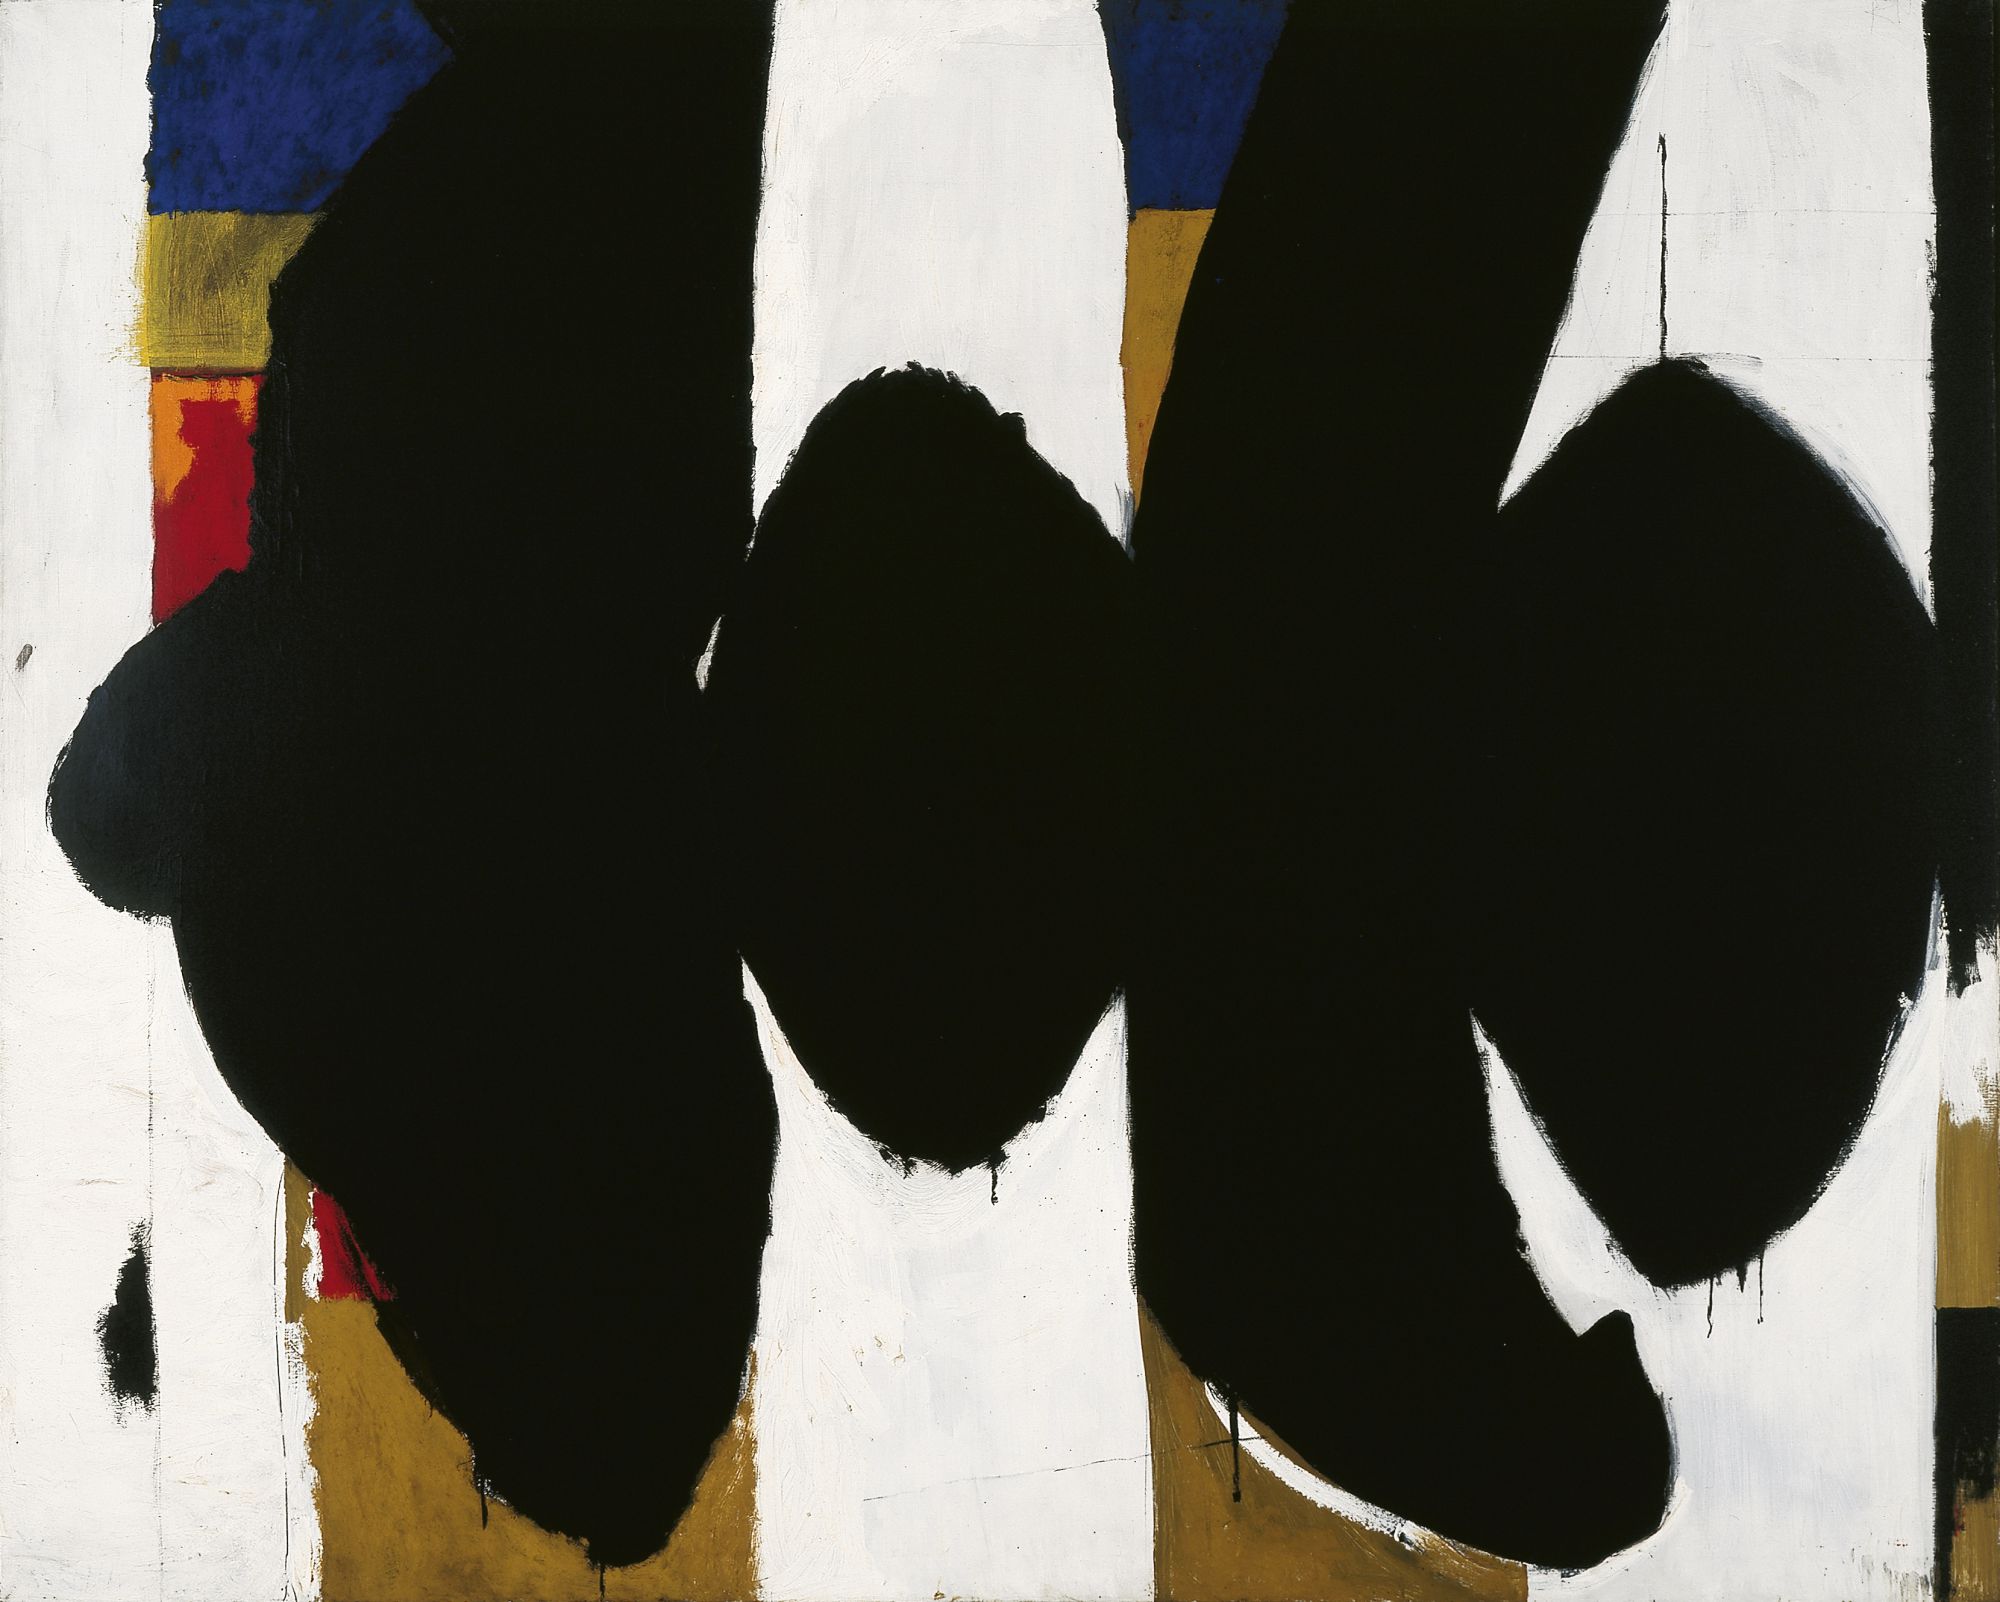 Elegy to the Spanish Republic XXXIV, 1954, oil on canvas, 80 ✕ 100 in. (203.2 ✕ 254 cm)